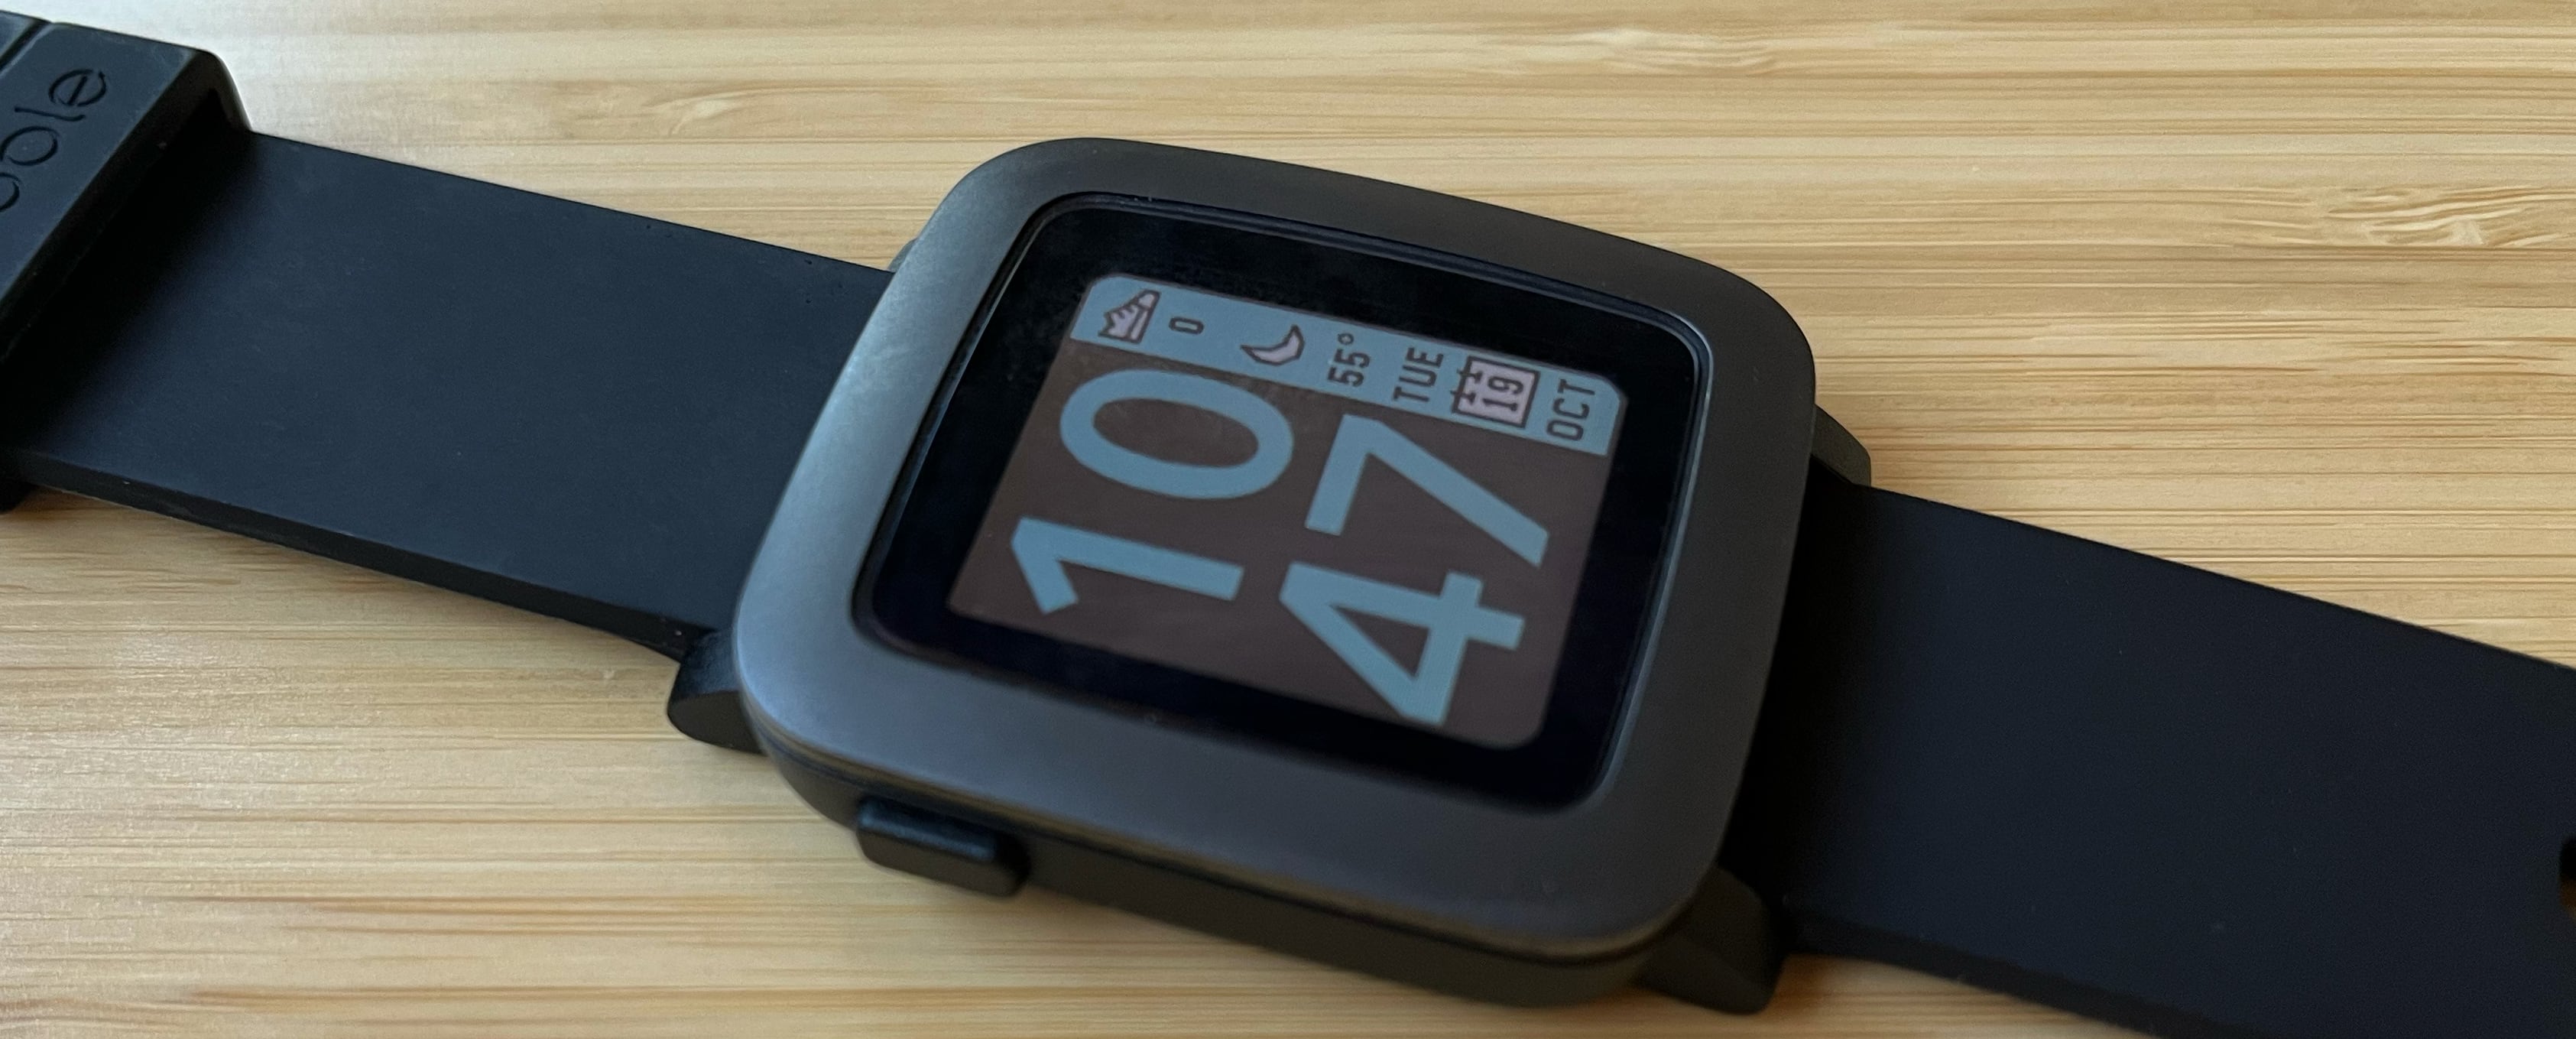 Pebble Time watch